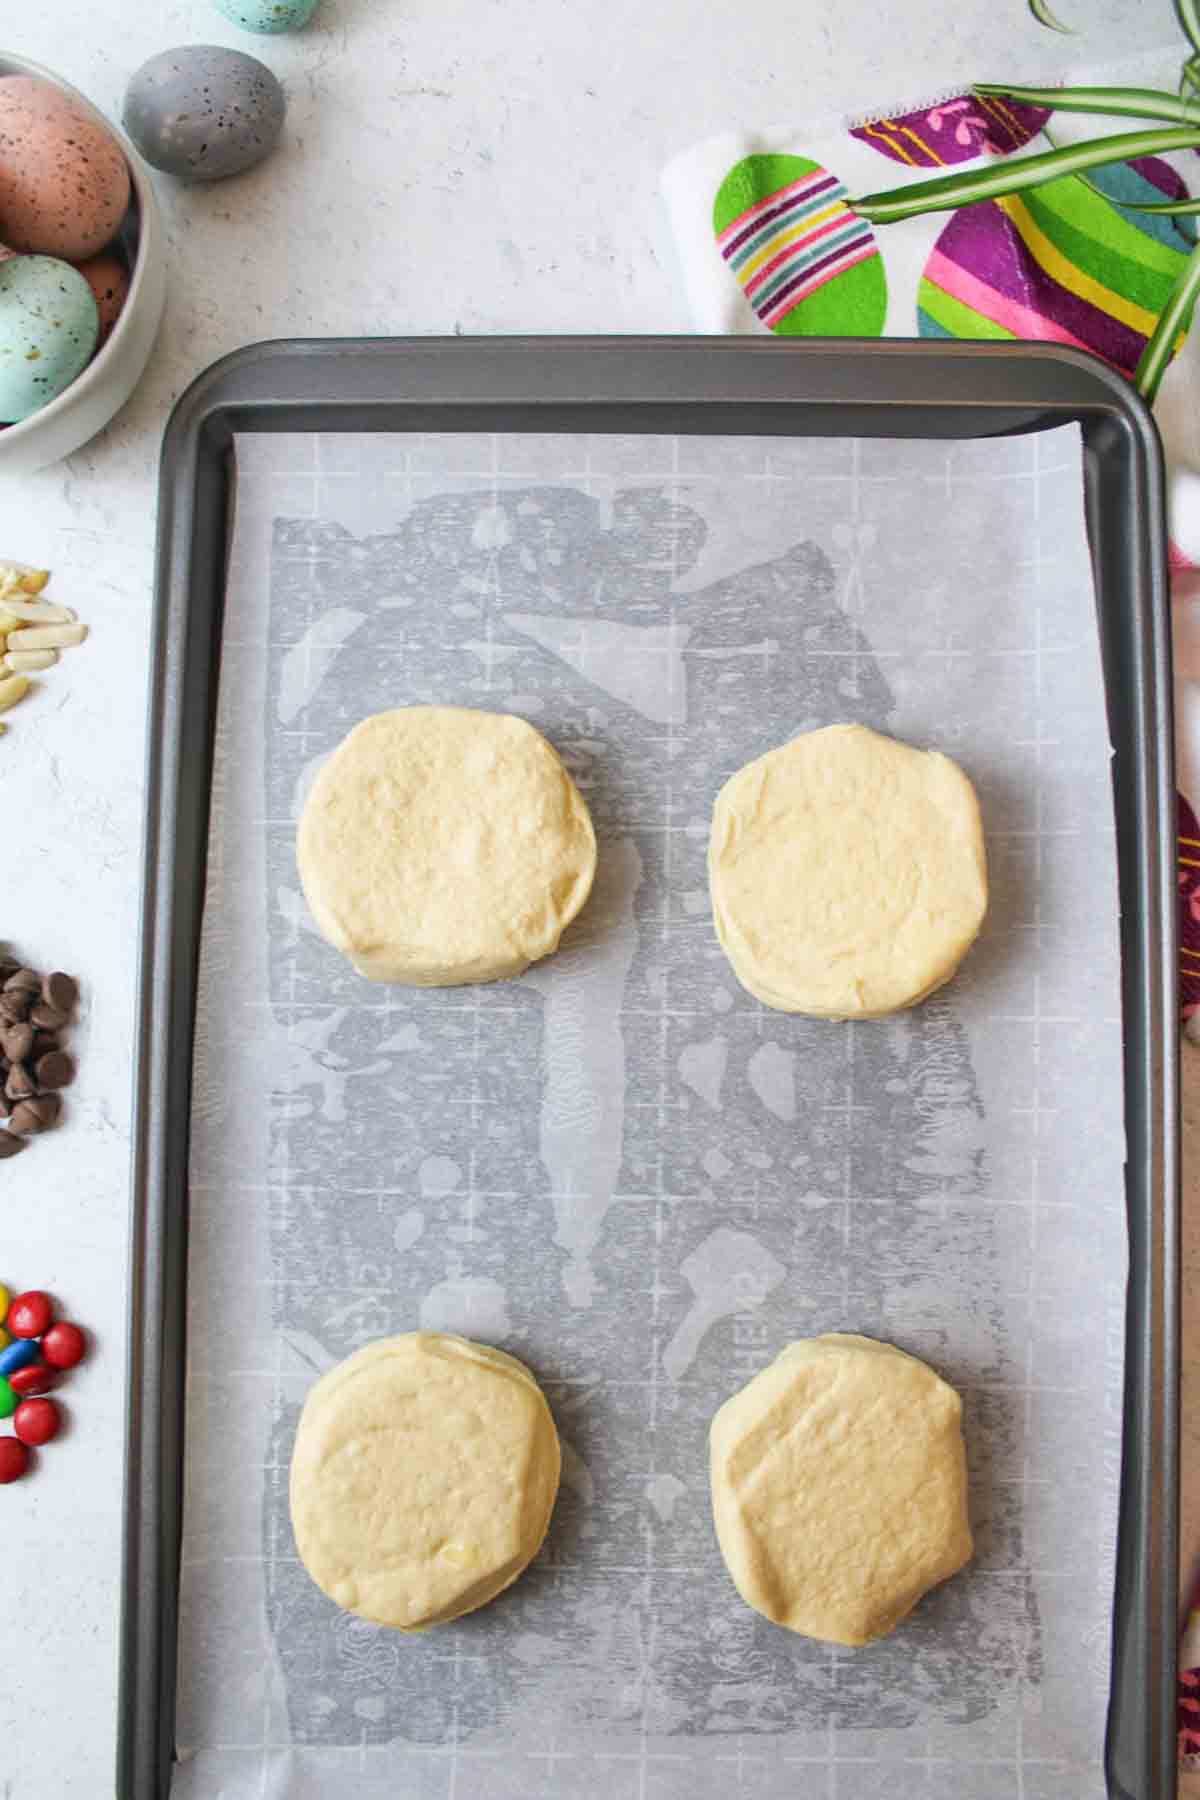 4 whole biscuits on a parchment lined baking sheet.